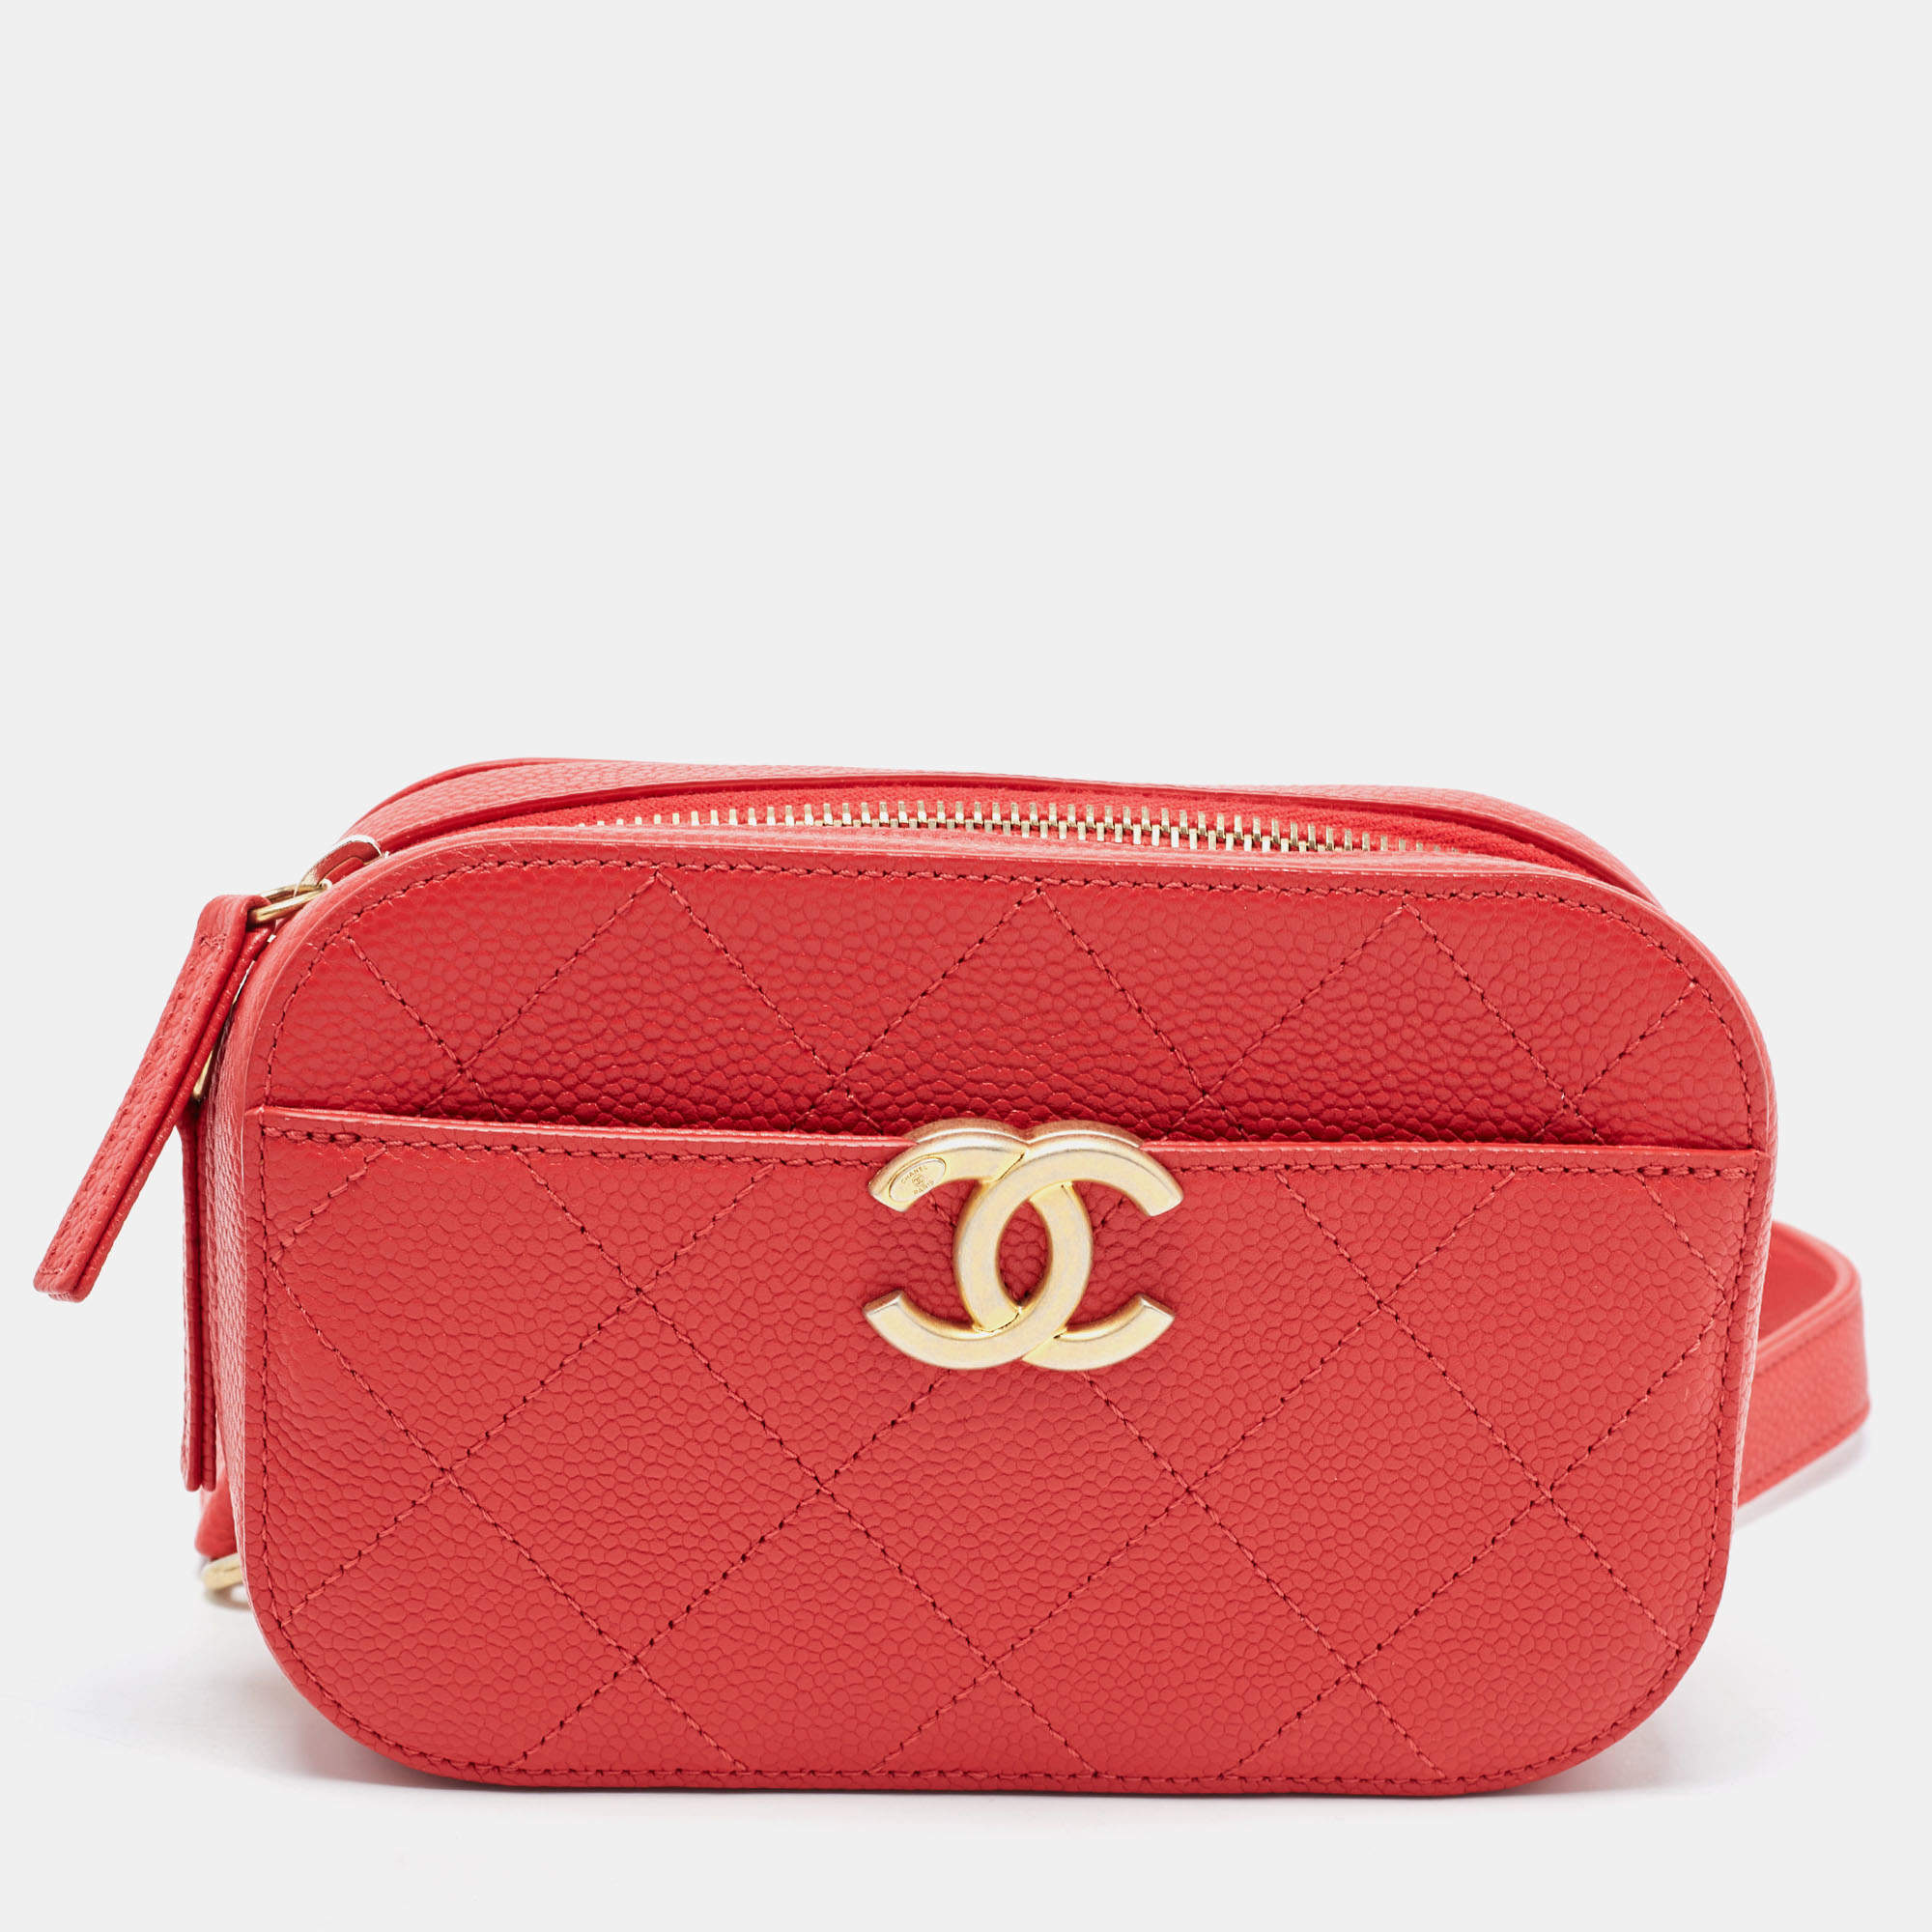 Chanel Red Quilted Caviar Leather Chic Affinity Belt Bag Chanel